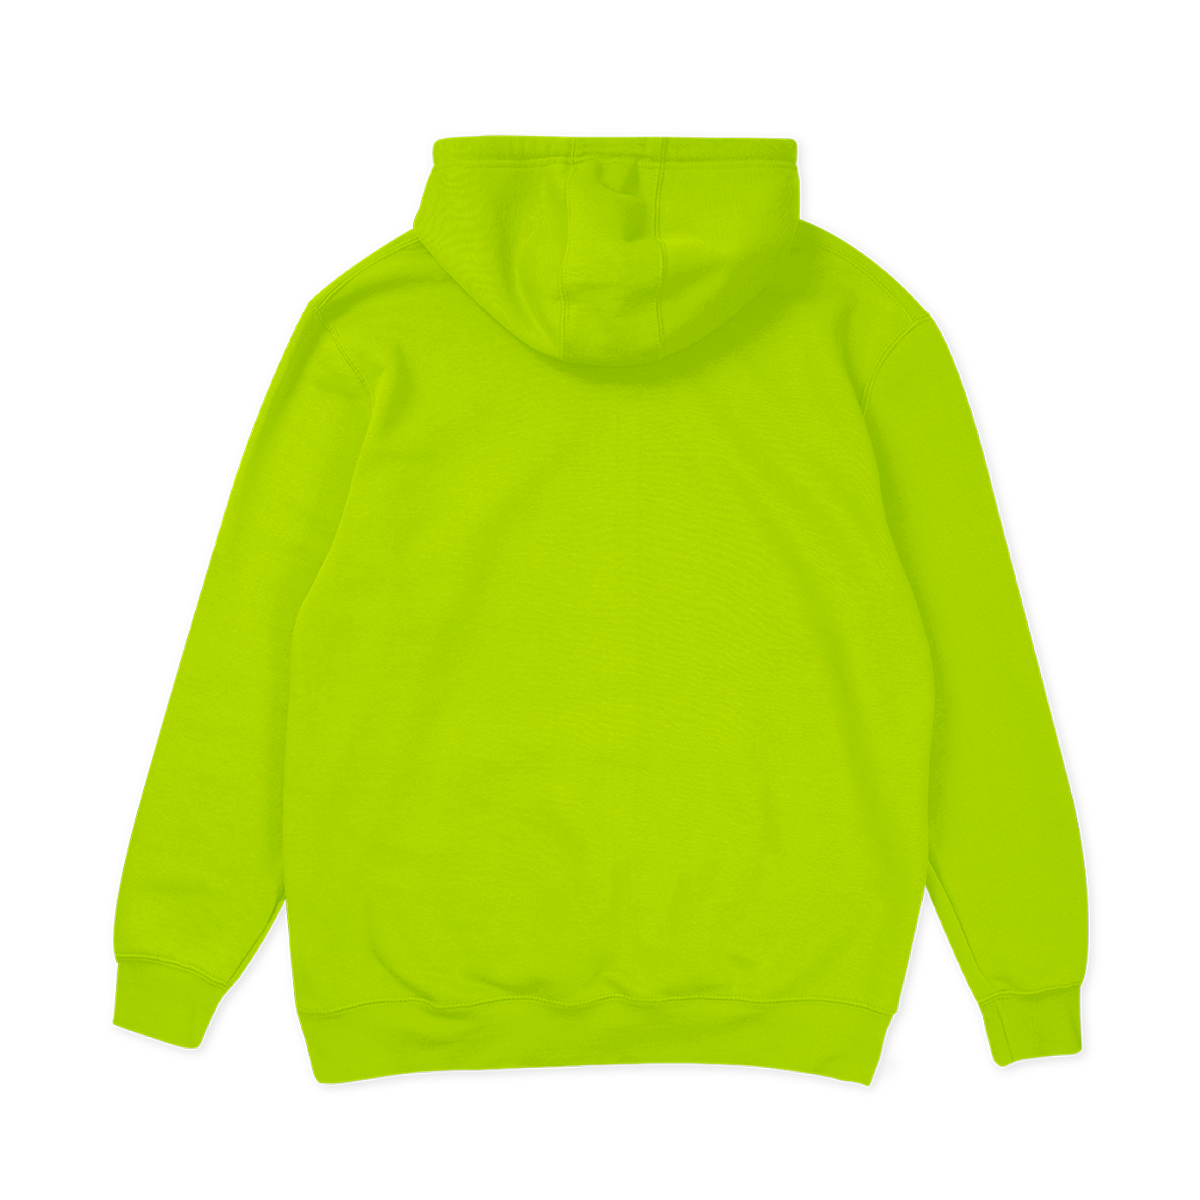 Leveling The Playing Field Hoodie - Safety Green